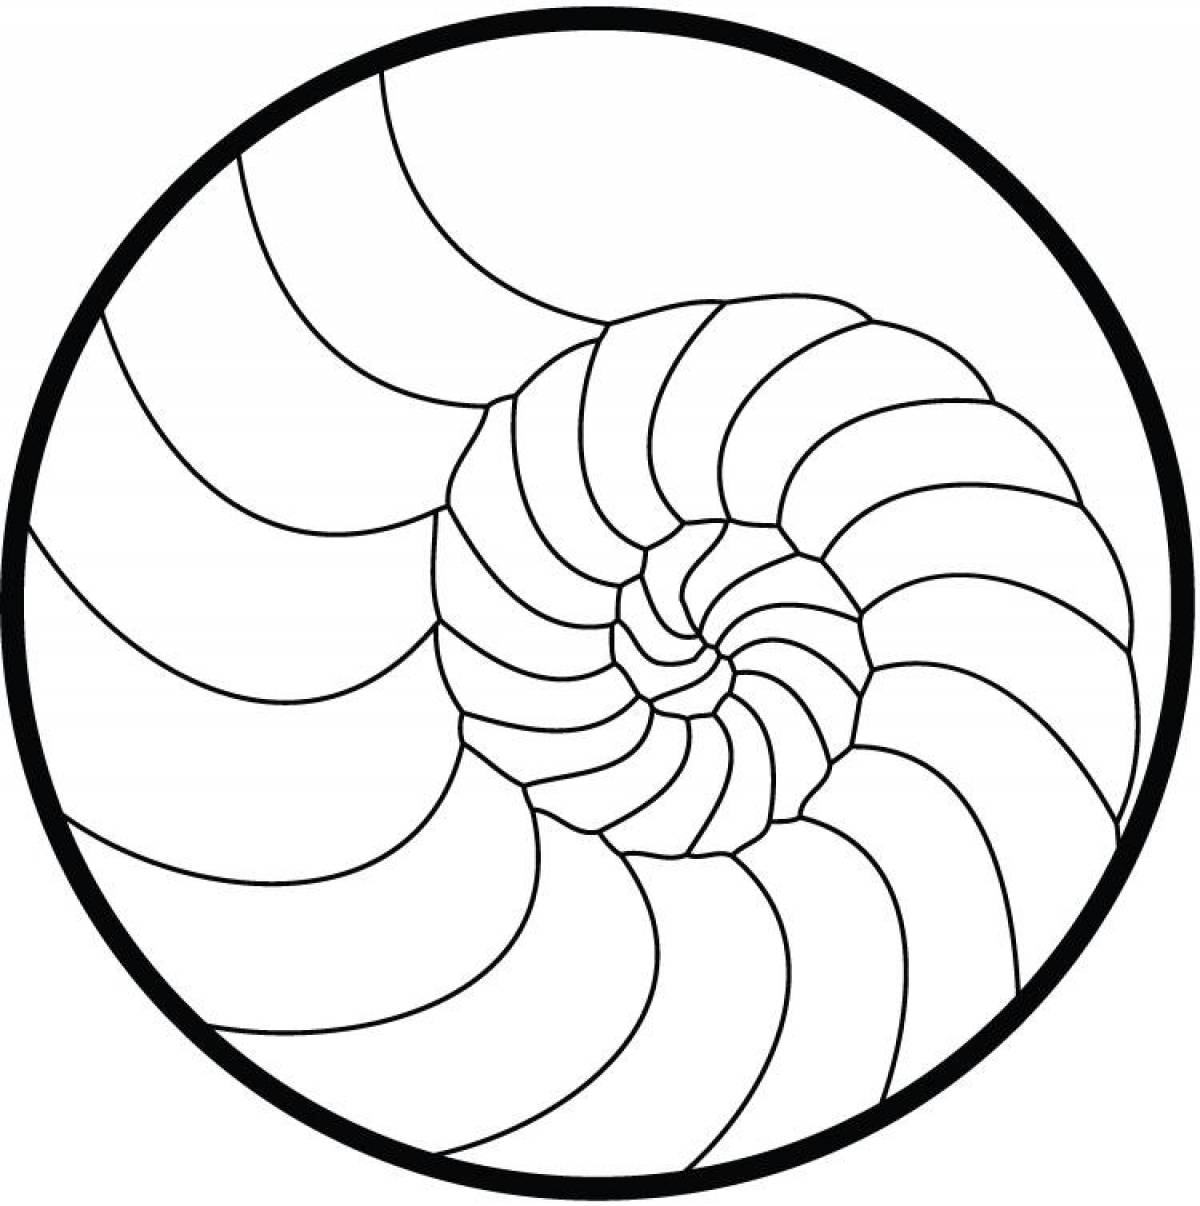 Coloring sweet spiral